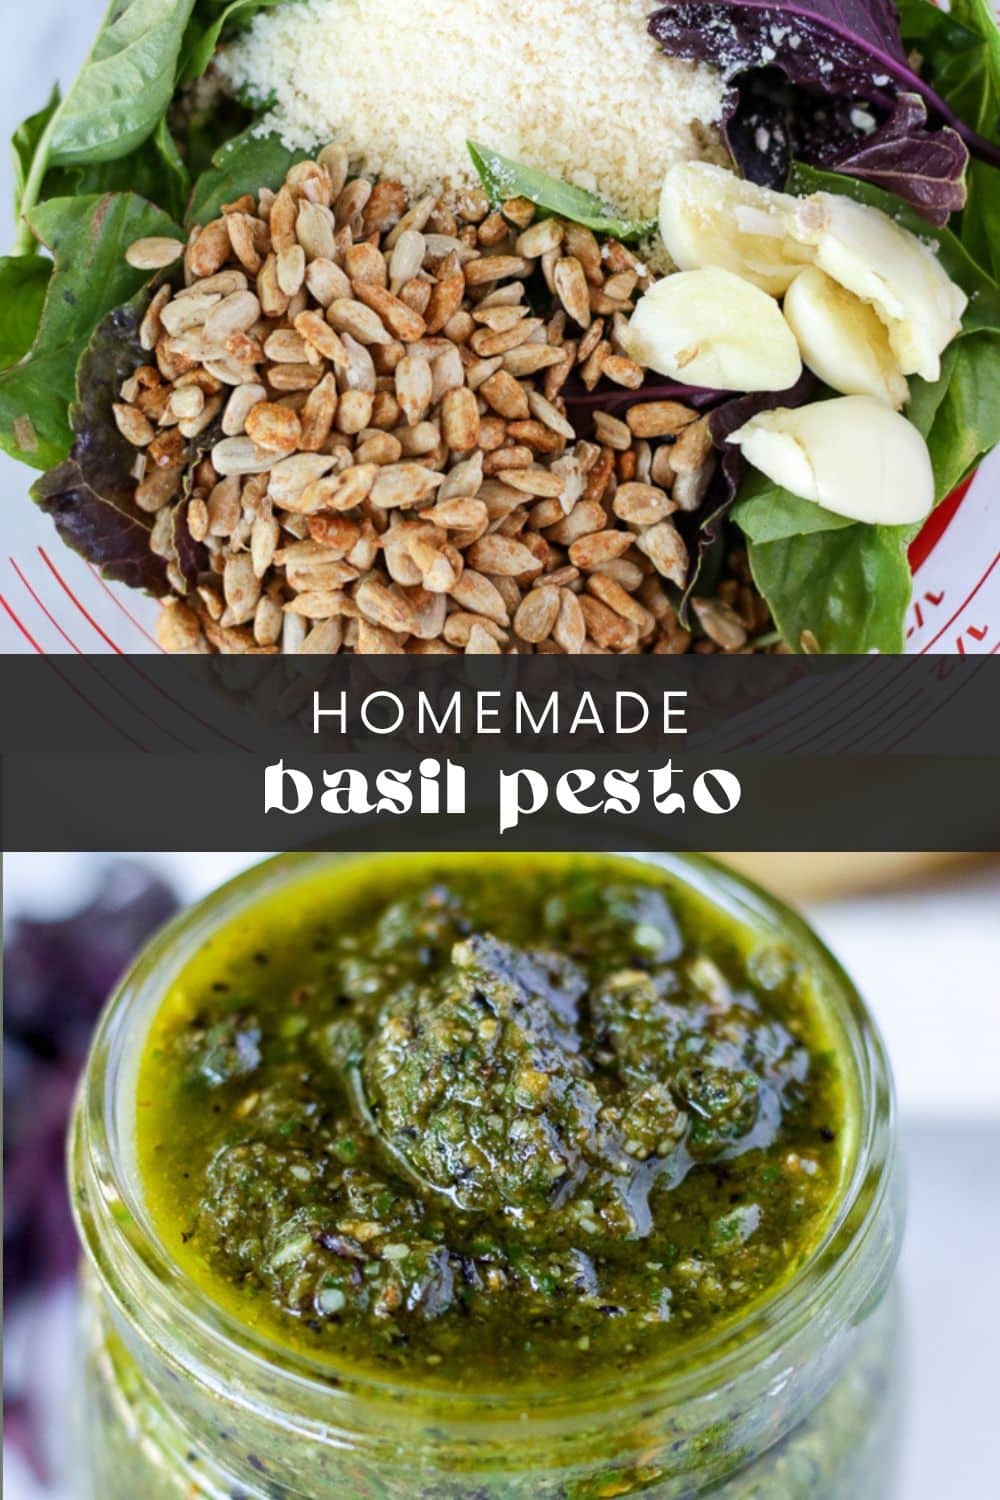 Full of bold herby freshness, this basil pesto recipe is a real delight! Oh-so simple and a handy ingredient to have around - this pesto sauce can be added to pasta dishes or spread on crusty bread. No matter how you serve it, its vibrant green color and delicious flavor are just the best!